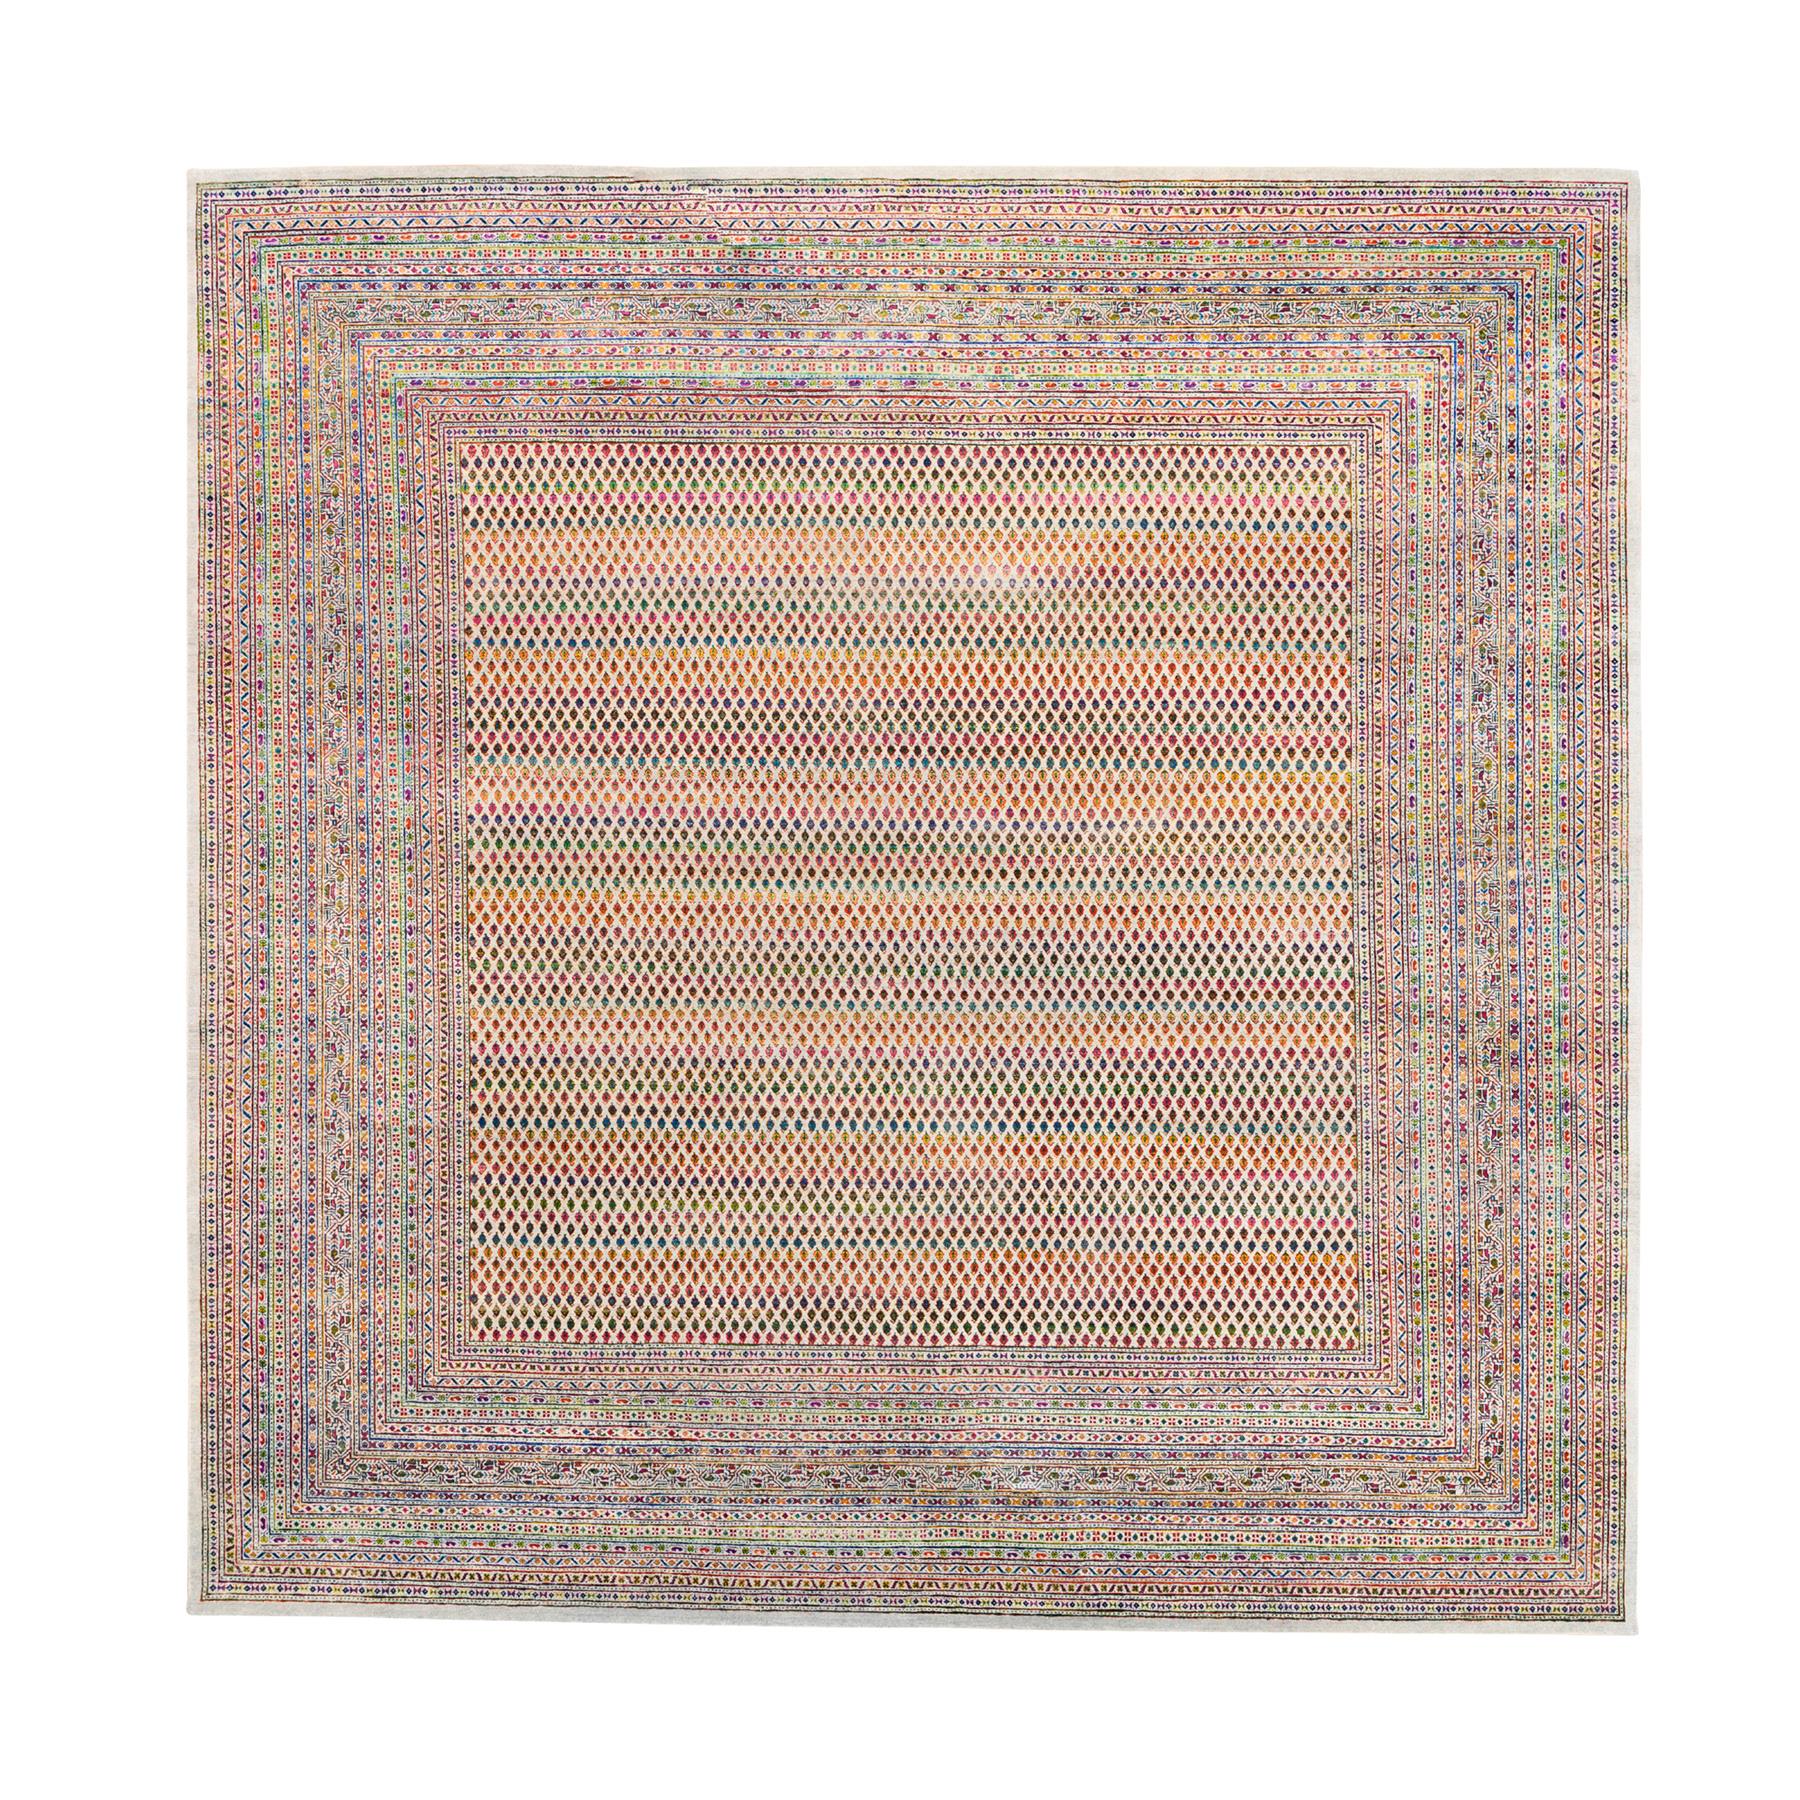 14'x14' Colorful Wool And Sari Silk Sarouk Mir Inspired With Multiple Borders Hand Woven Oriental Square Rug 